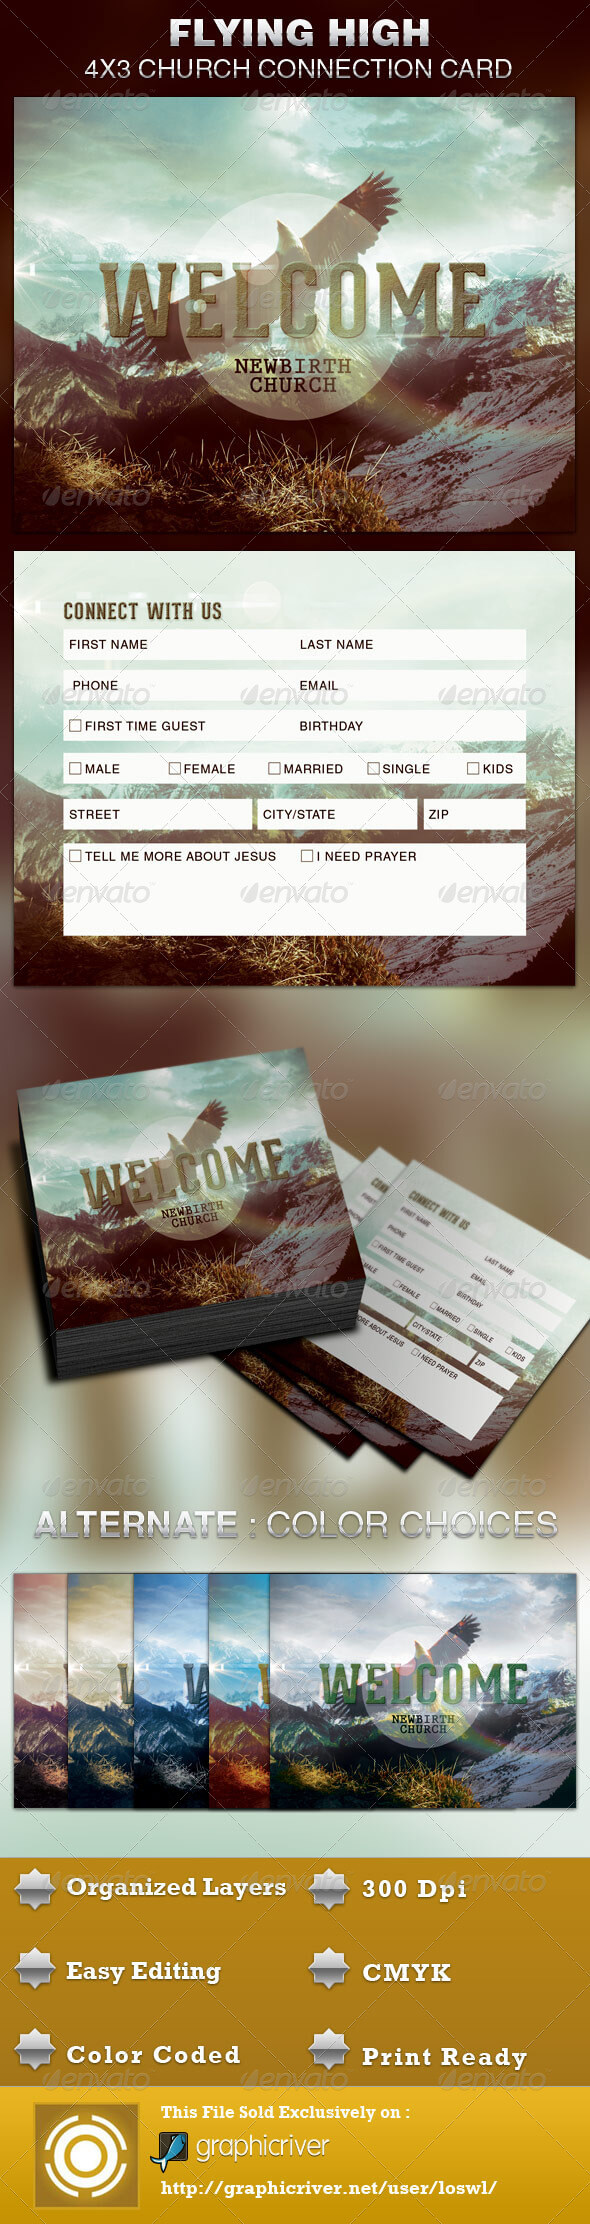 Summit Card Designs & Invite Templates From Graphicriver Throughout Decision Card Template